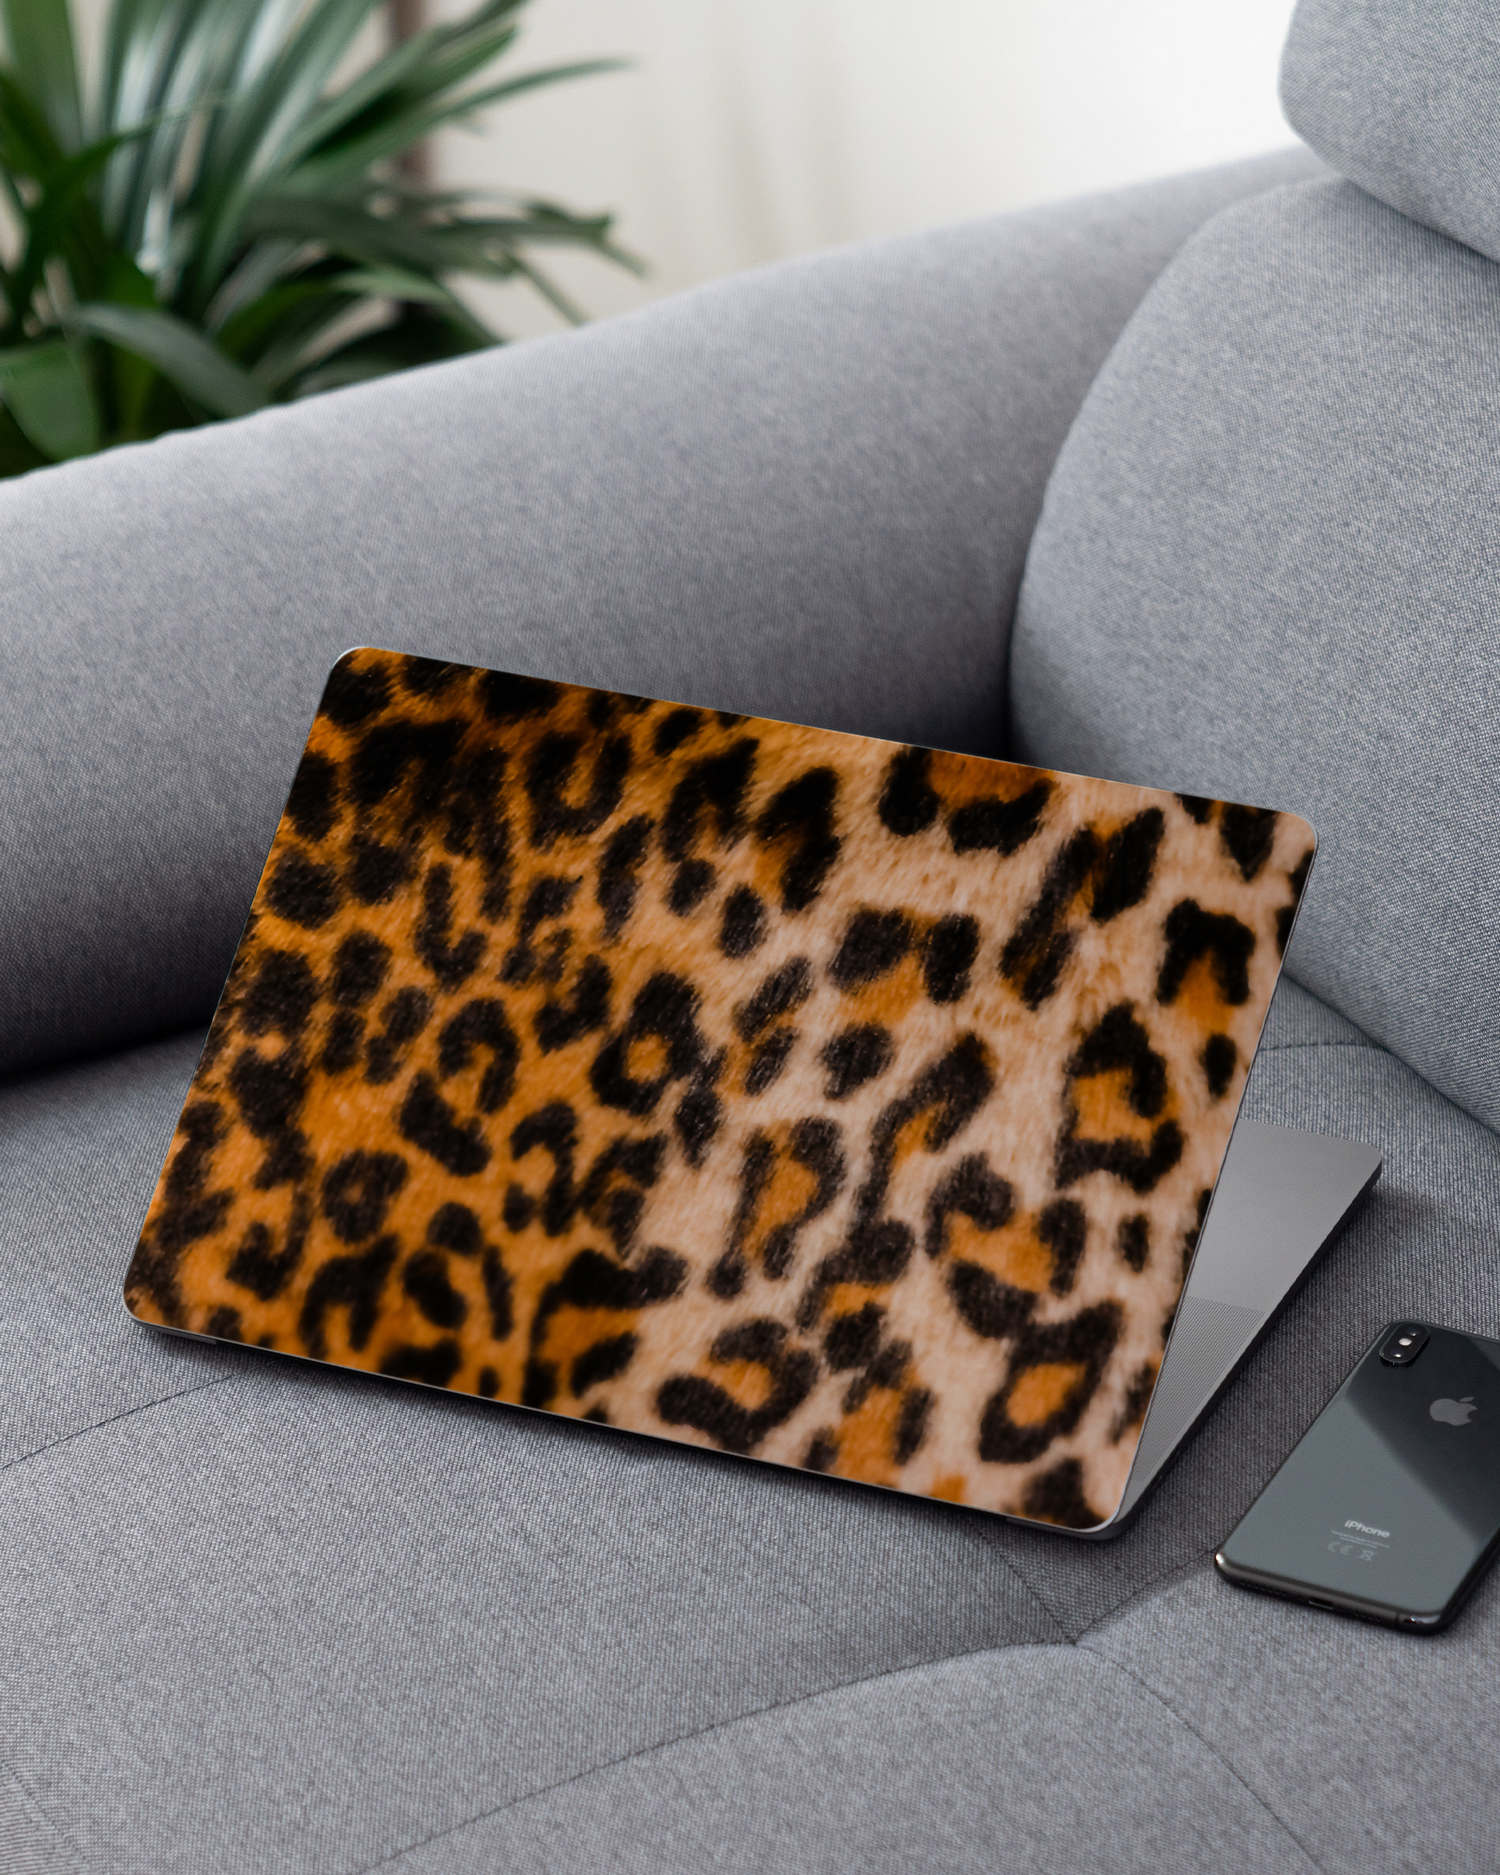 Leopard Pattern Laptop Skin for 13 inch Apple MacBooks on a couch